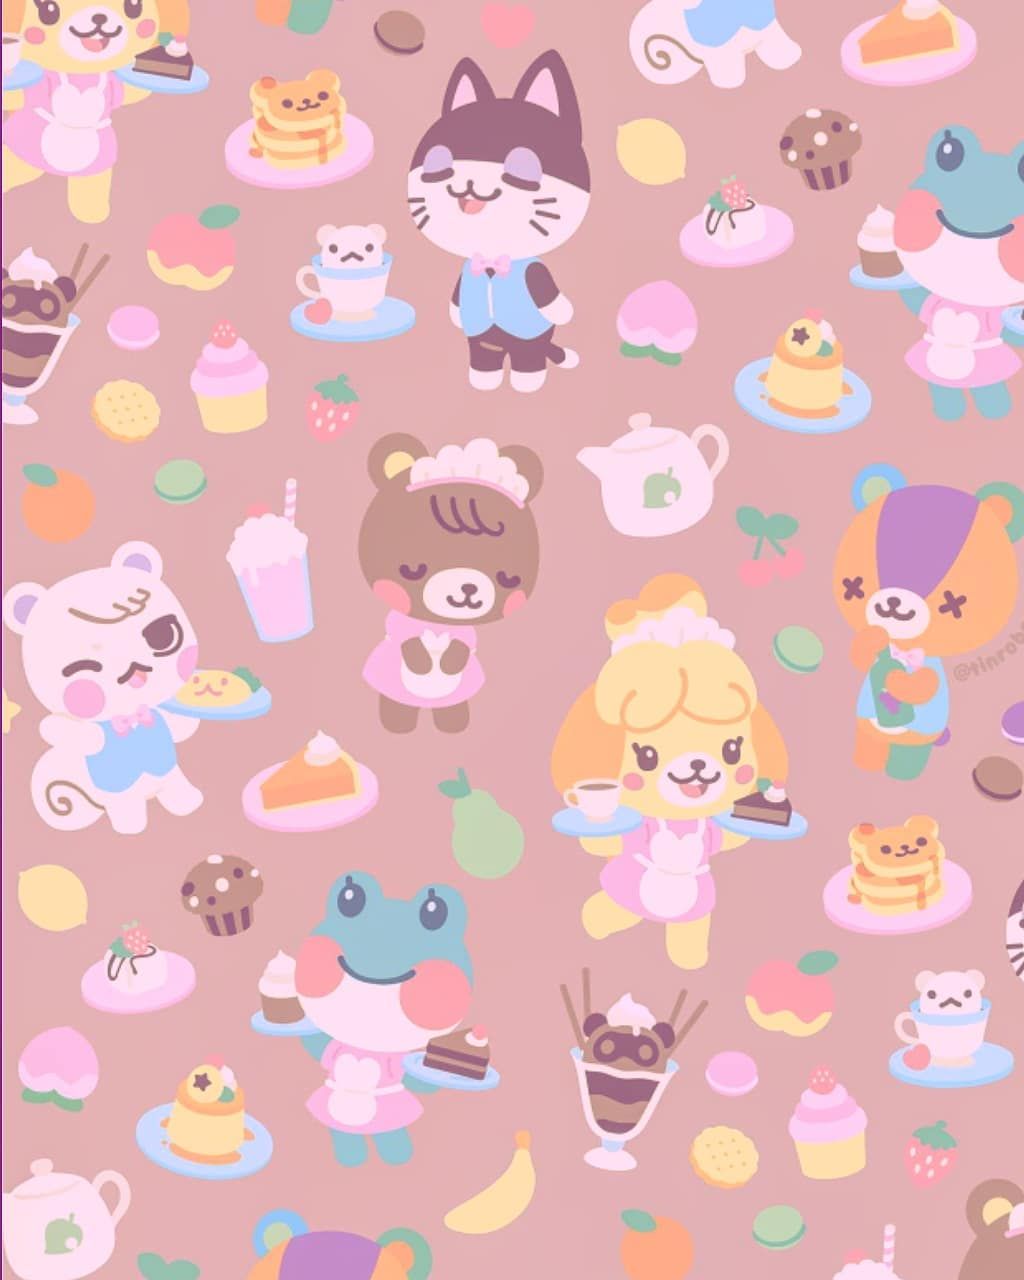 A cute wallpaper of the Animal Crossing characters - Animal Crossing